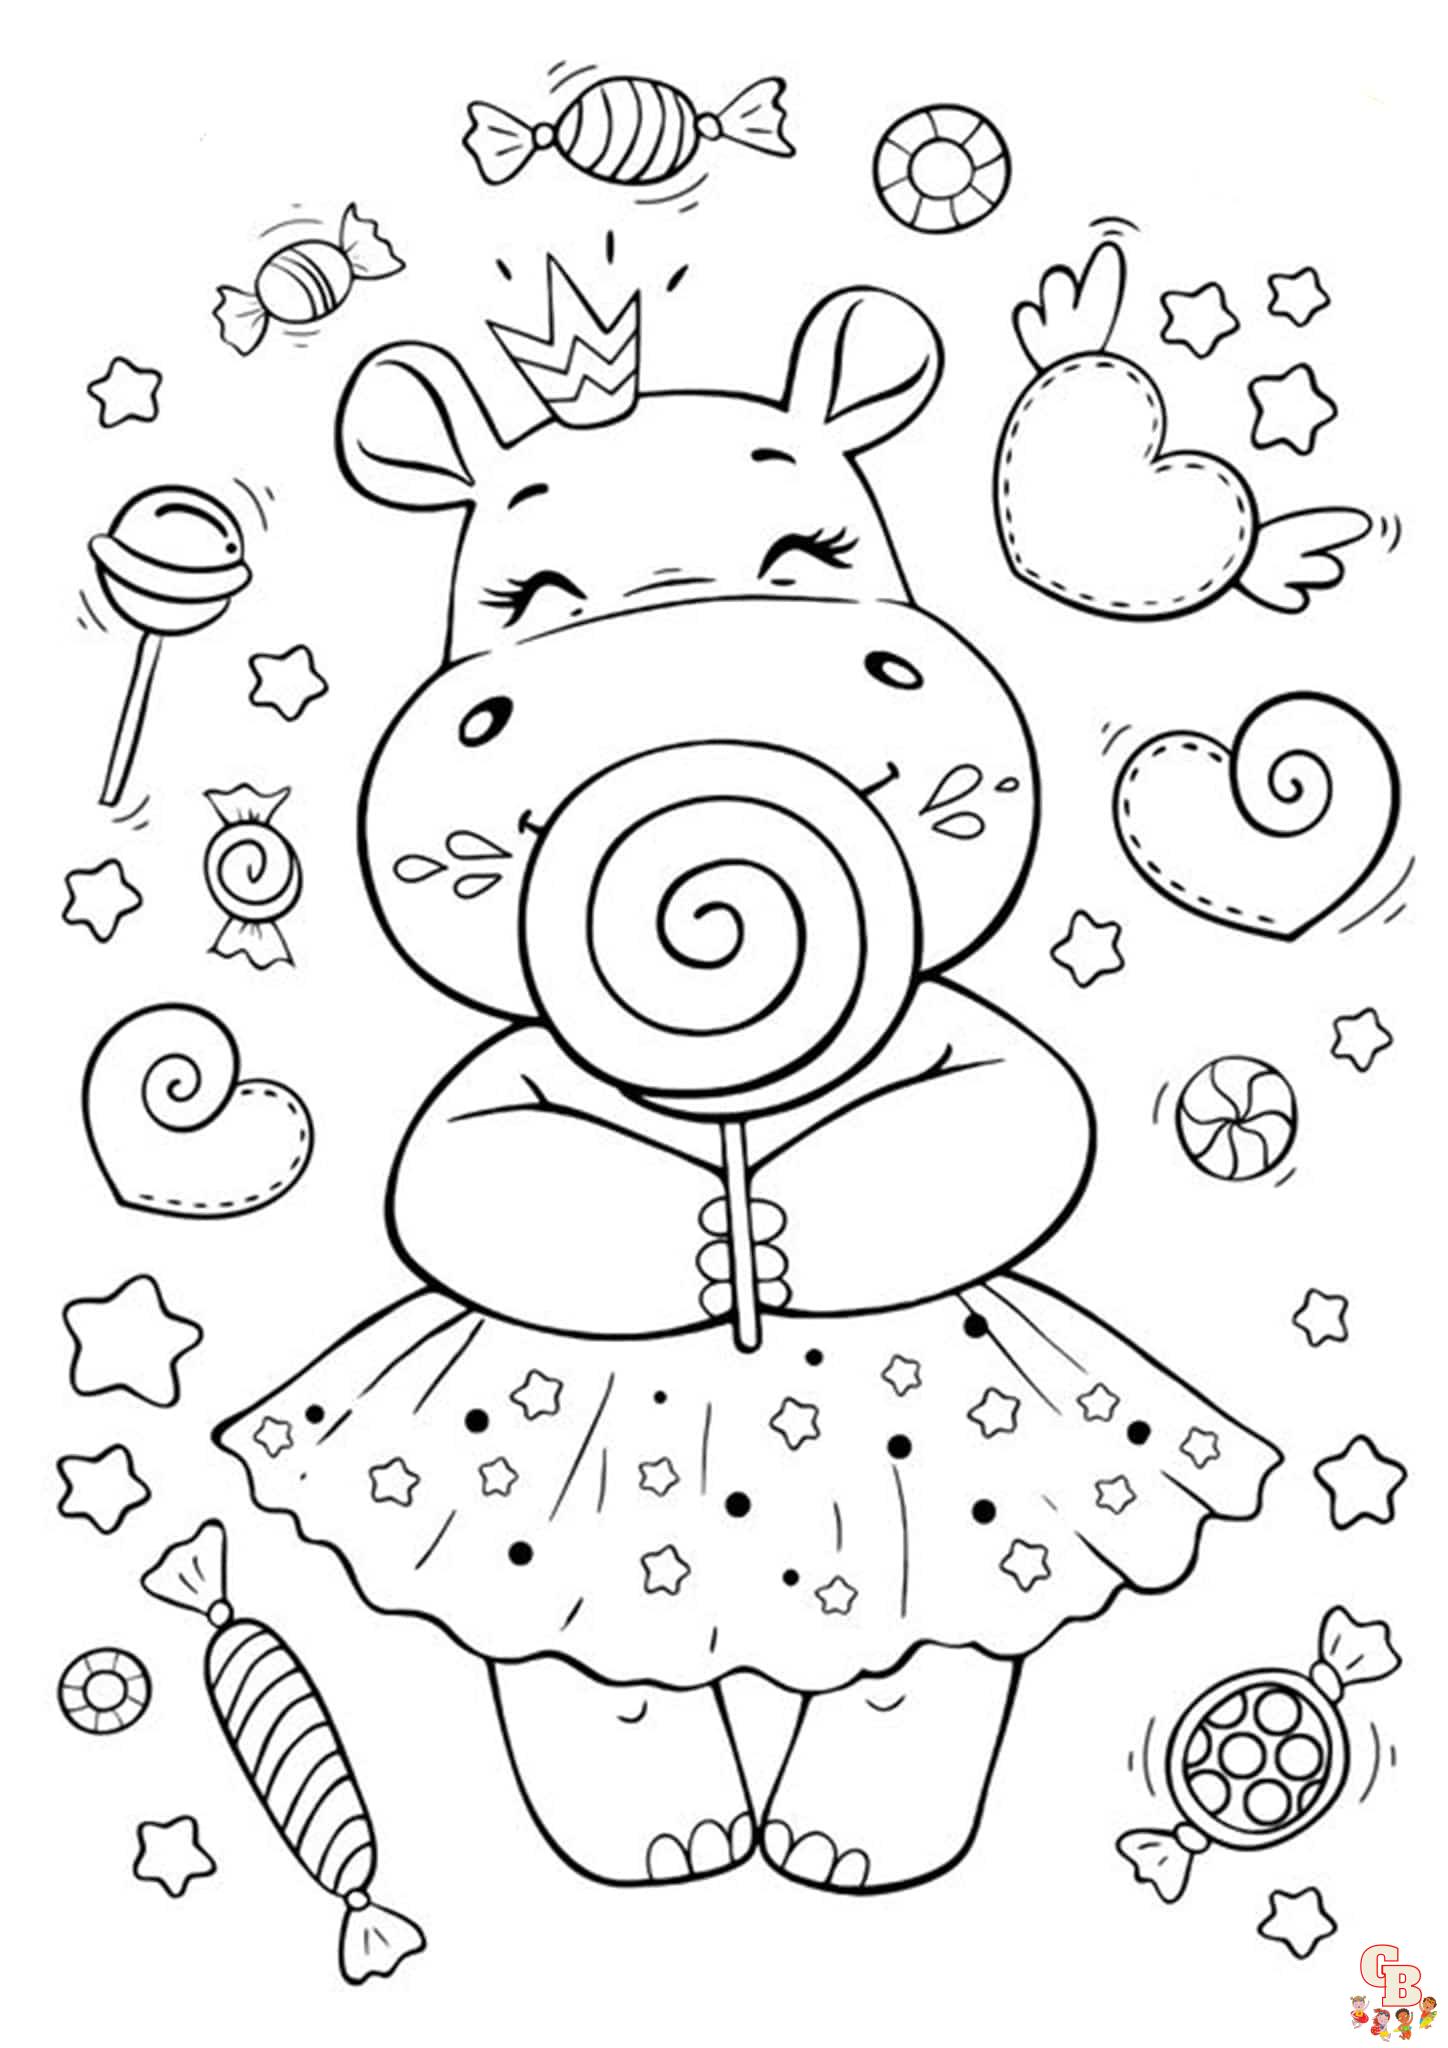 Easy cute coloring pages 17